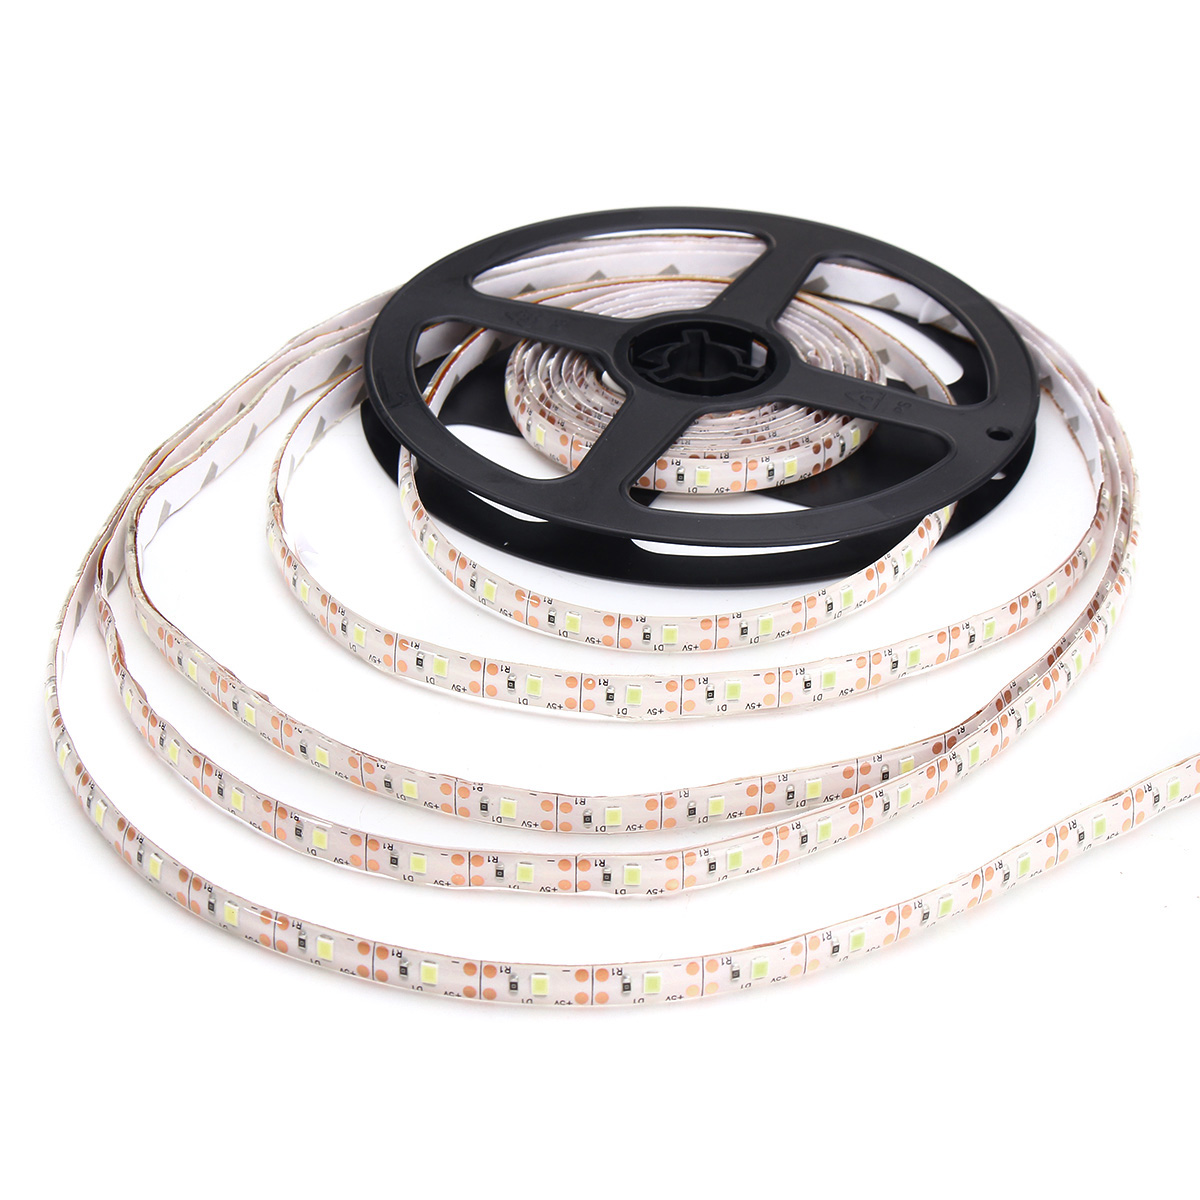 DC5V 5M USB 2835 SMD Pure White Warm White Red Blue Waterproof LED Strip TV Backlight 